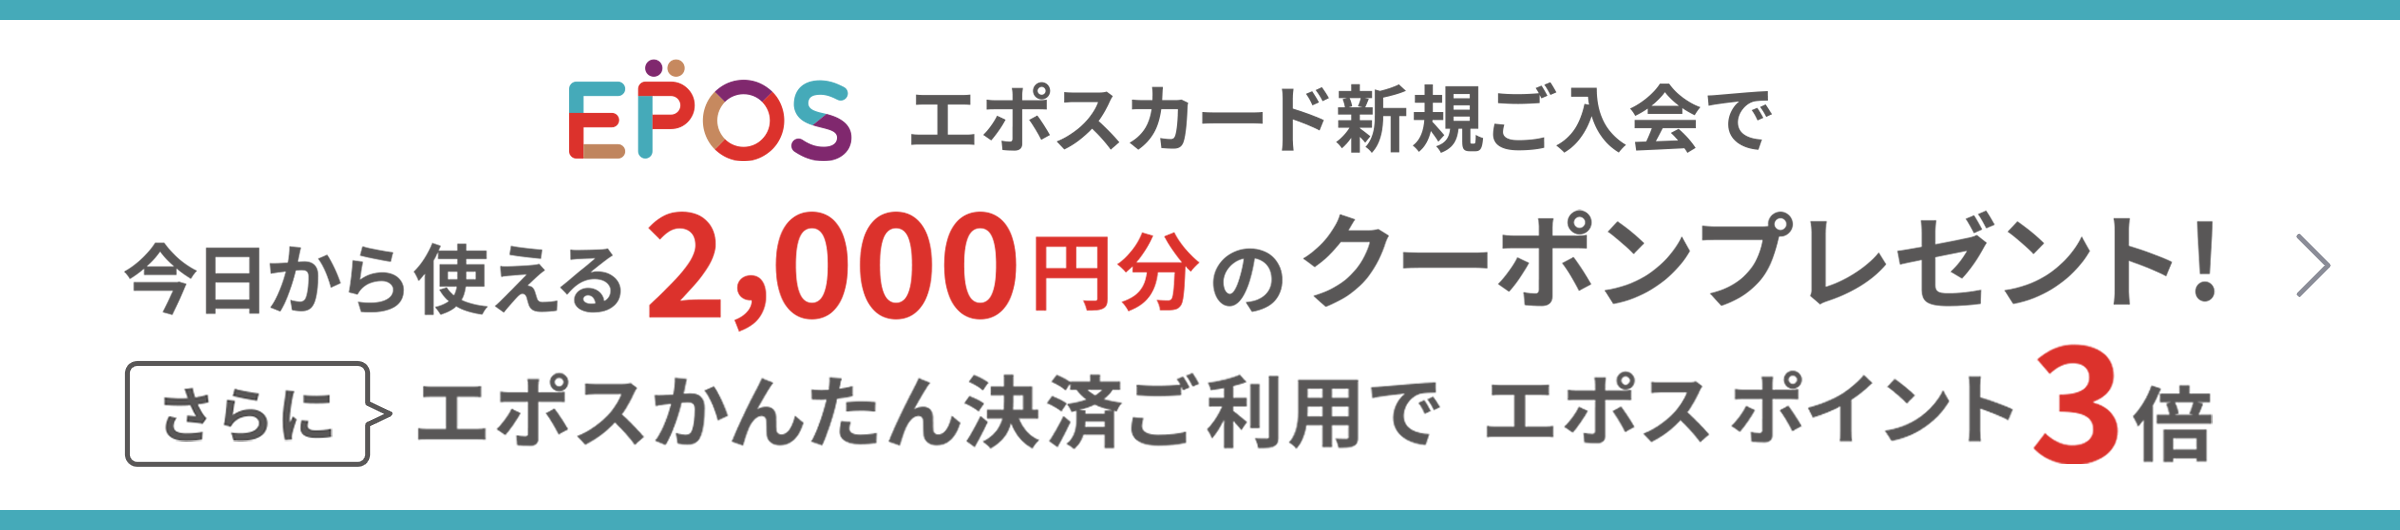 EPOS Get a 2,000 yen coupon that you can use from today when you sign up for a new EPOS card. Normally